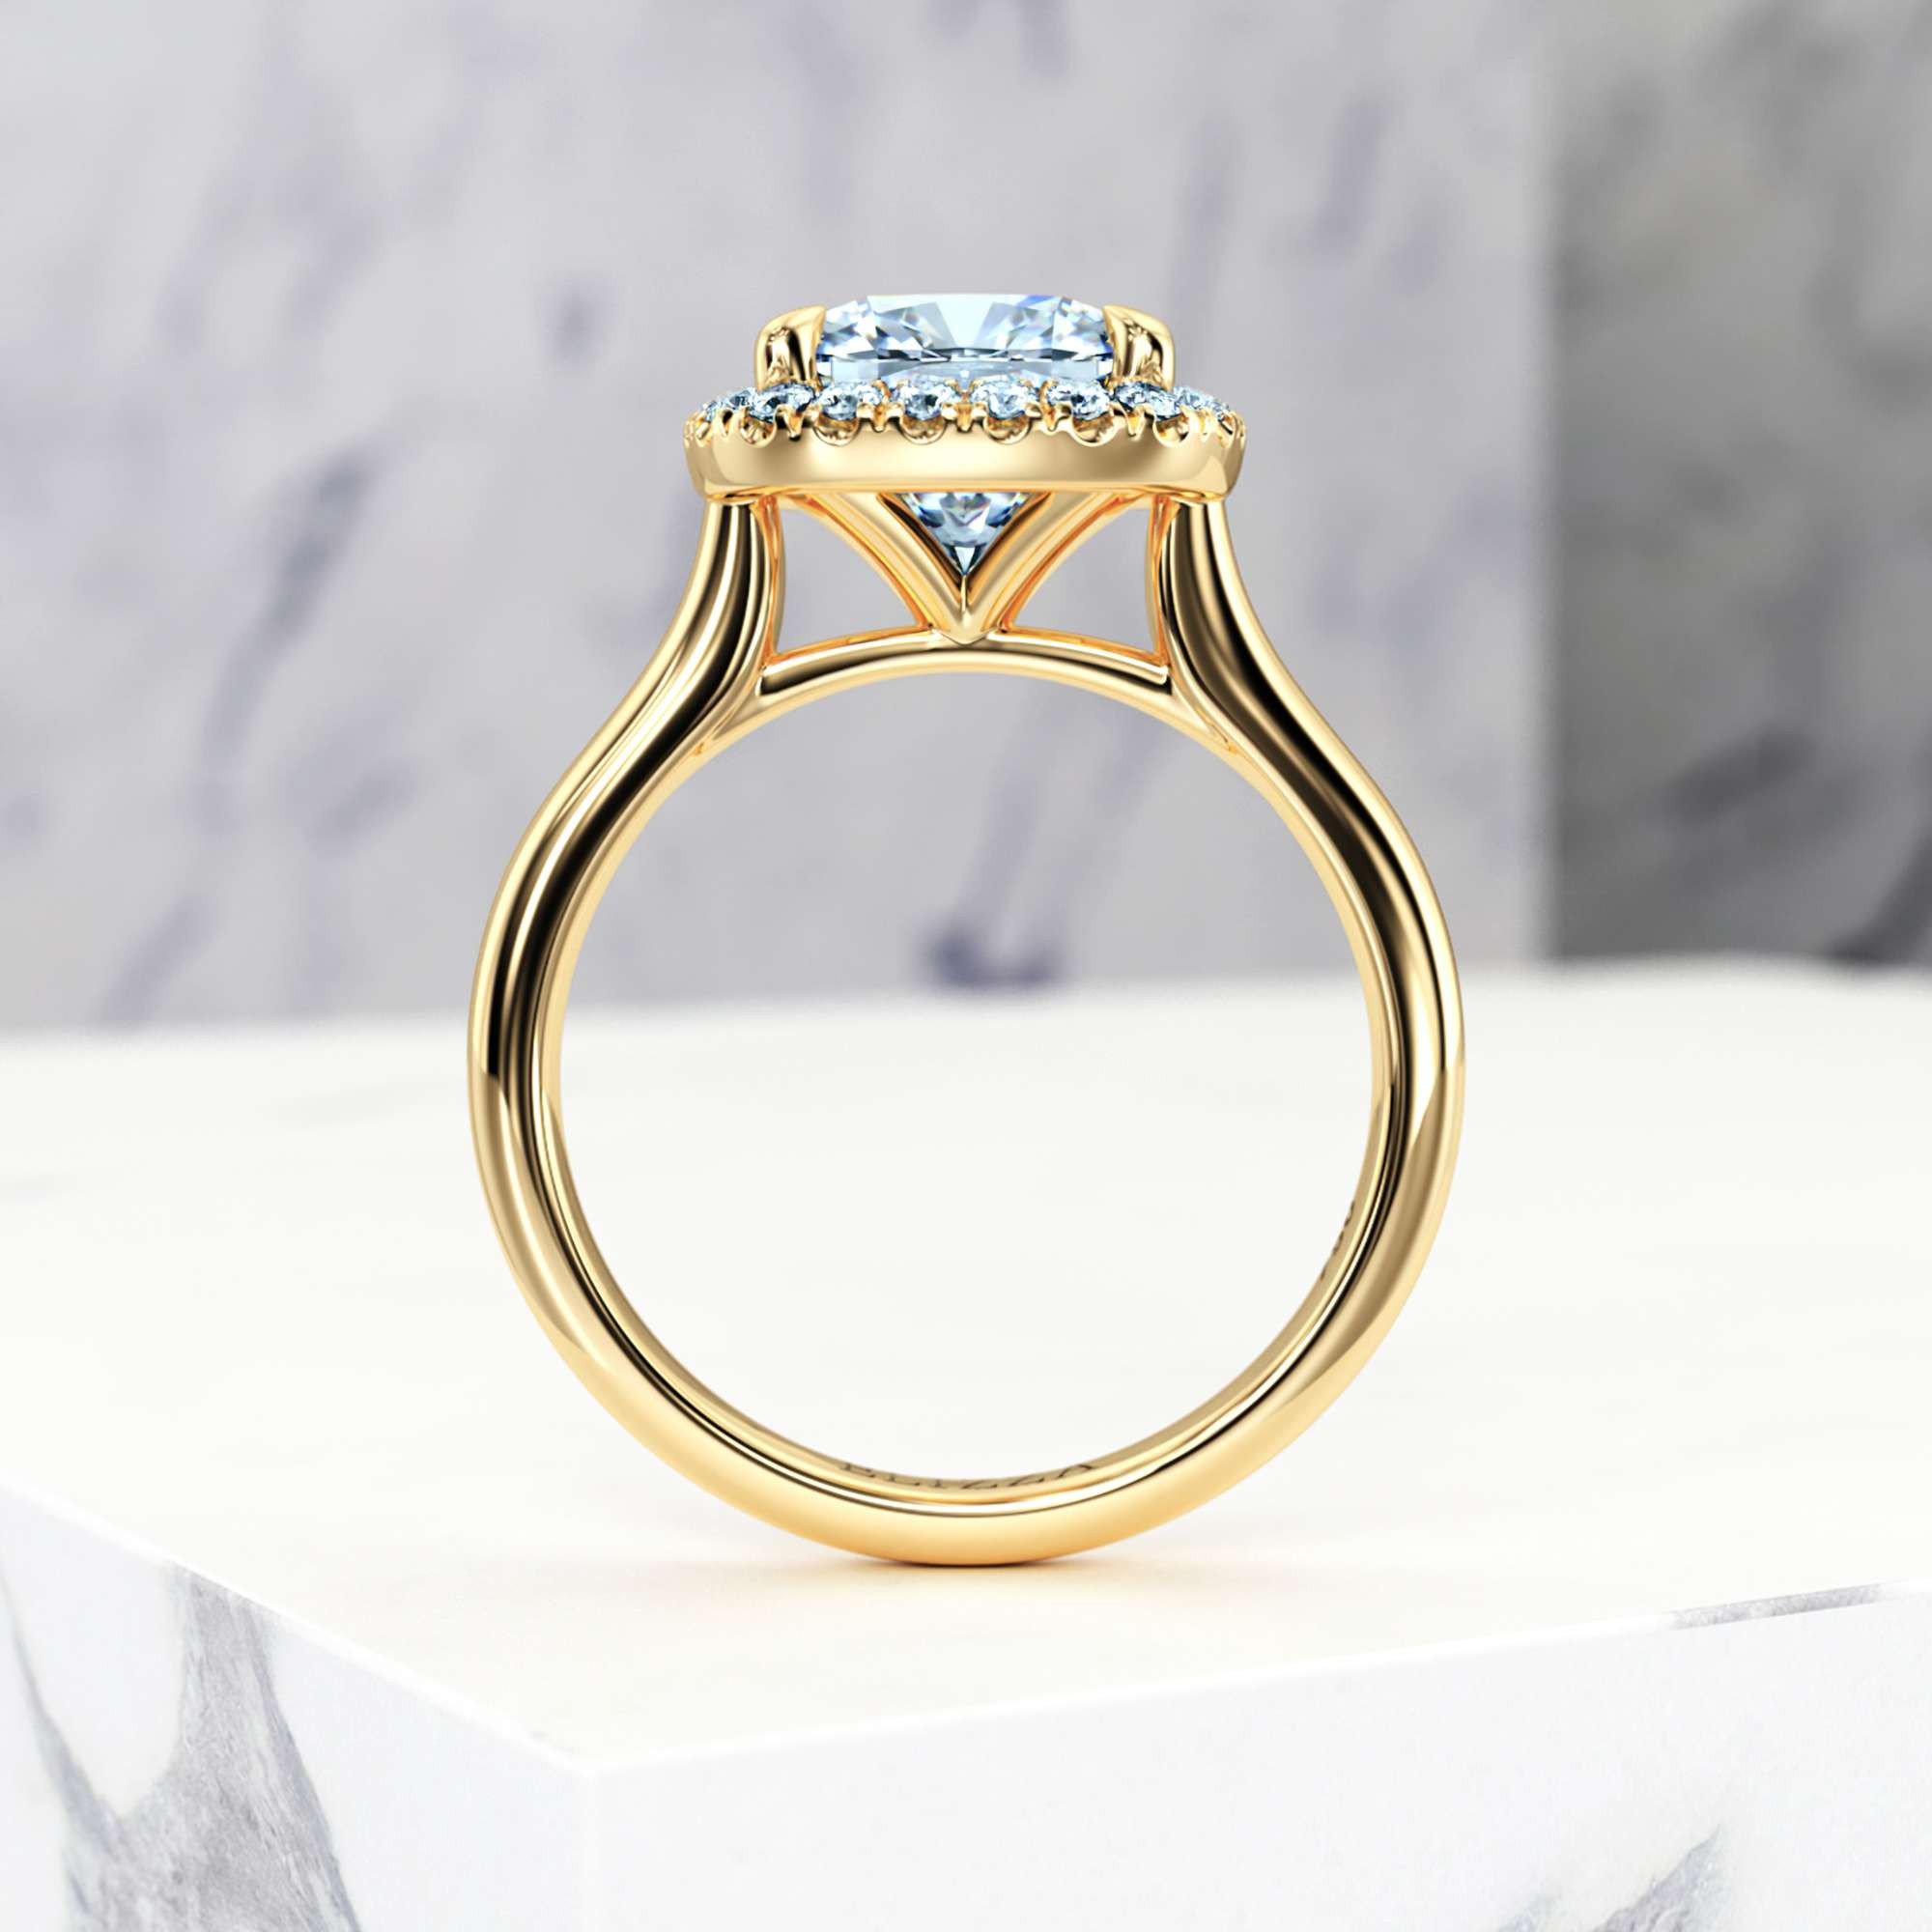 Verlobungsring Effie Square Cushion | Square cushion | 14K Gelbgold | Natural | GIA Certified | 0.30ct SI1 H 6